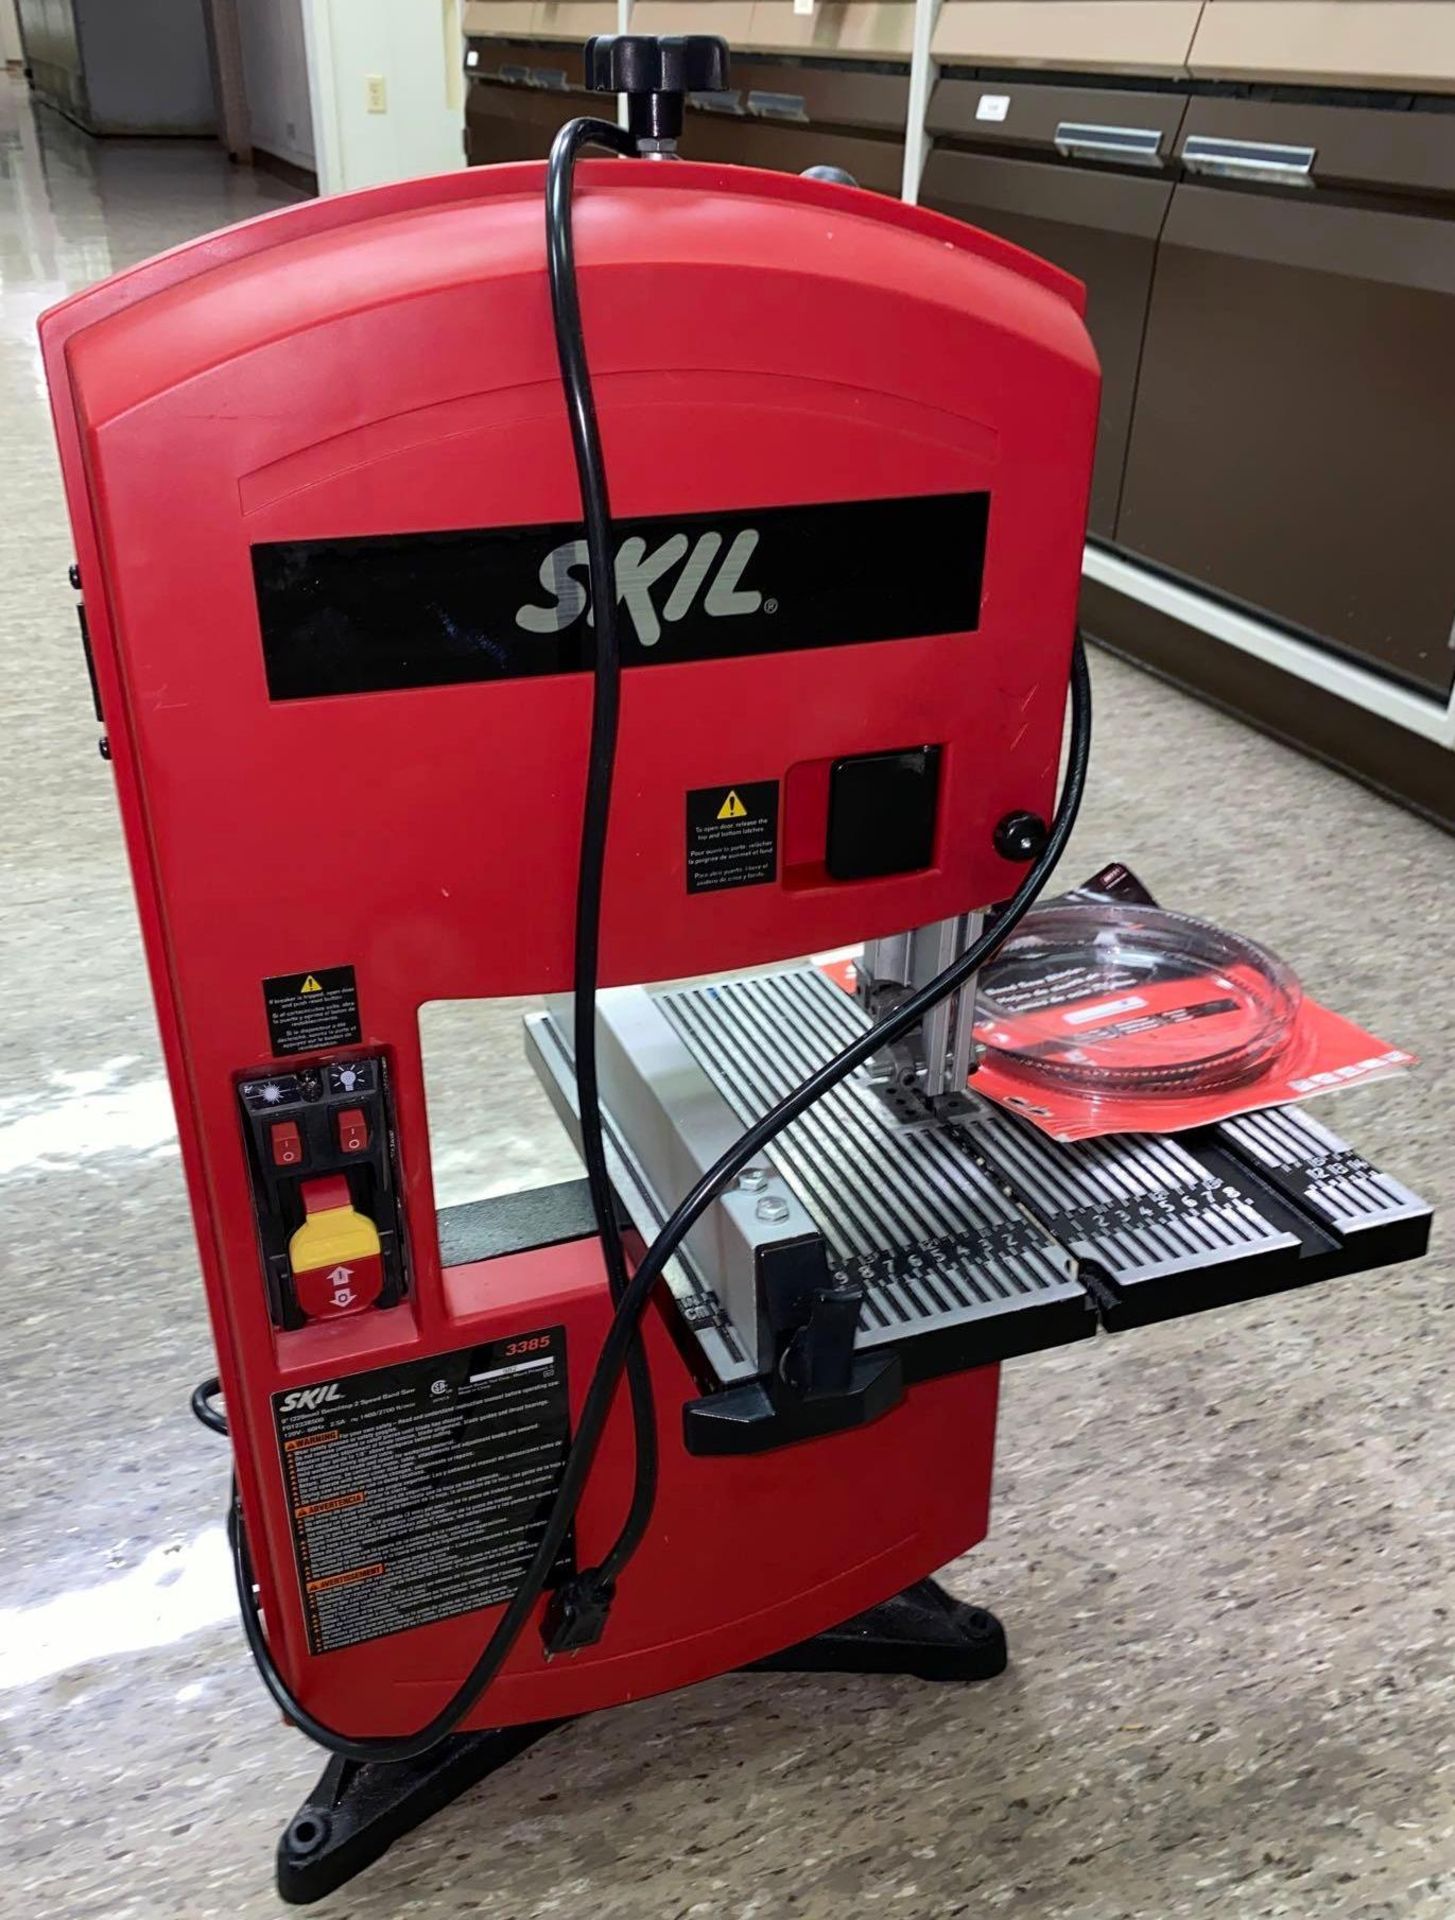 Skil 9 inch Benchtop Band Saw, model # 3385